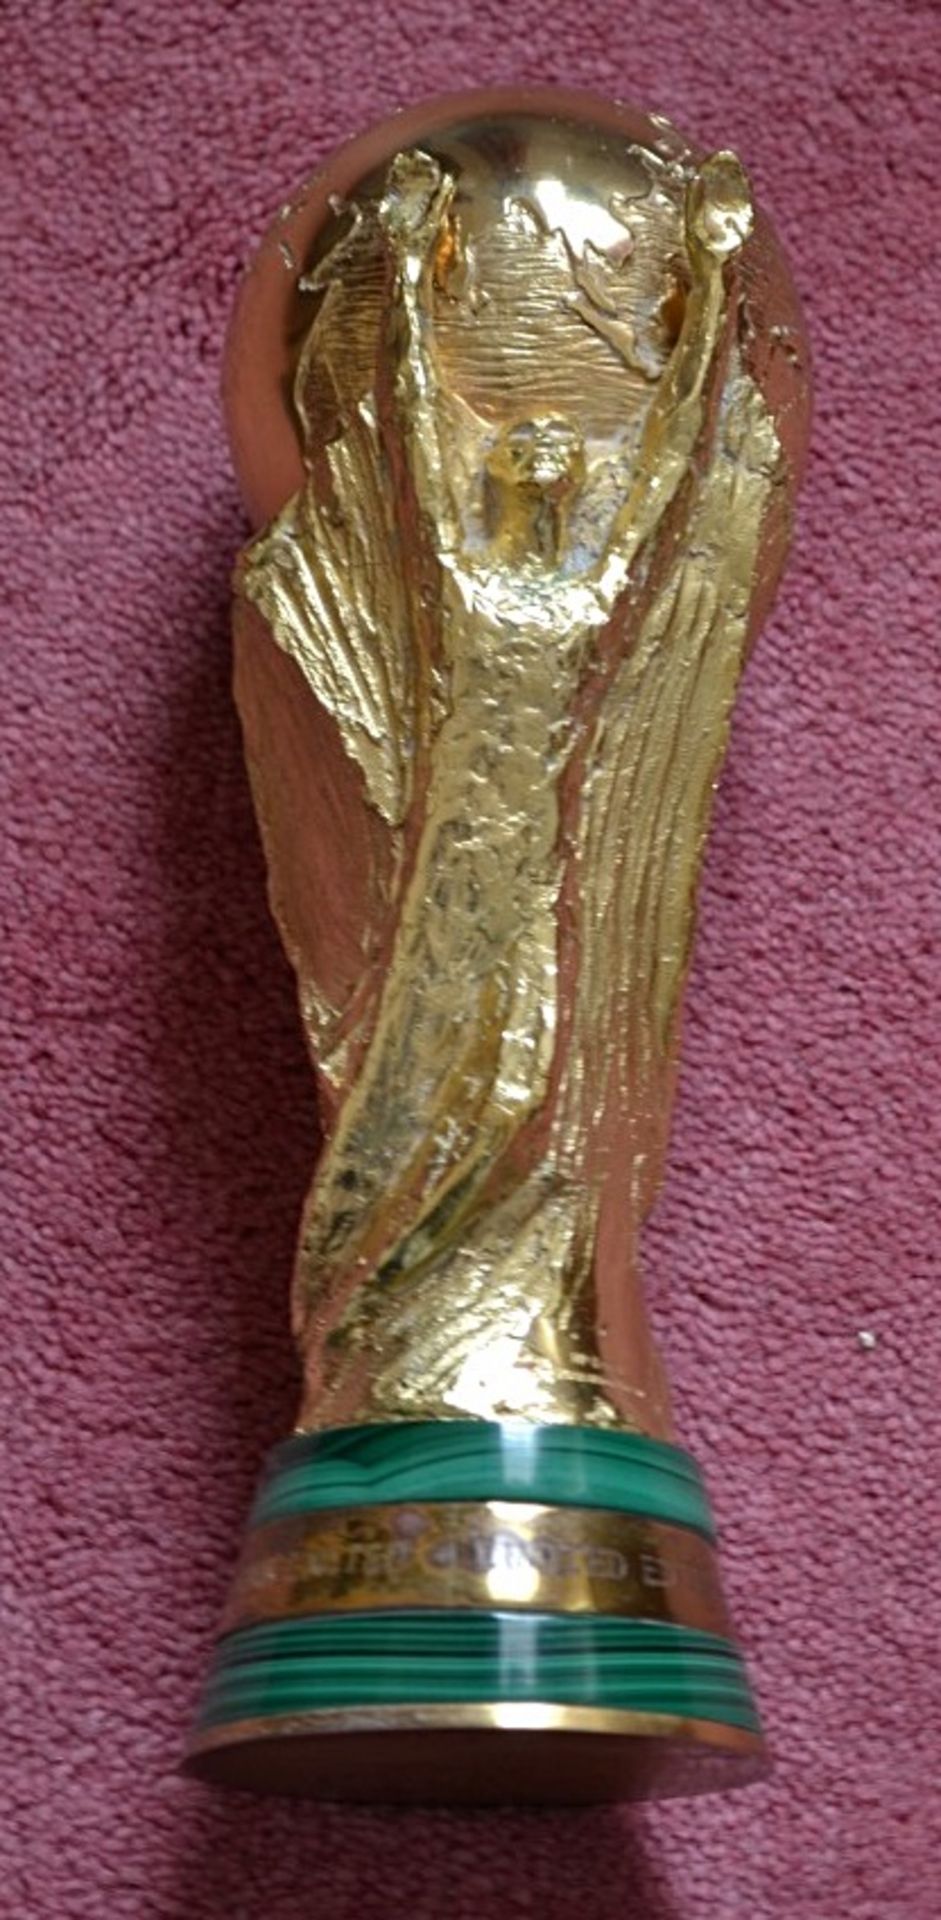 1 x Official World Cup 1:1.3 Scale 27cm Replica By Gerrard & Co. - Gold Plated - No.8 Of Only 10 - Image 4 of 16